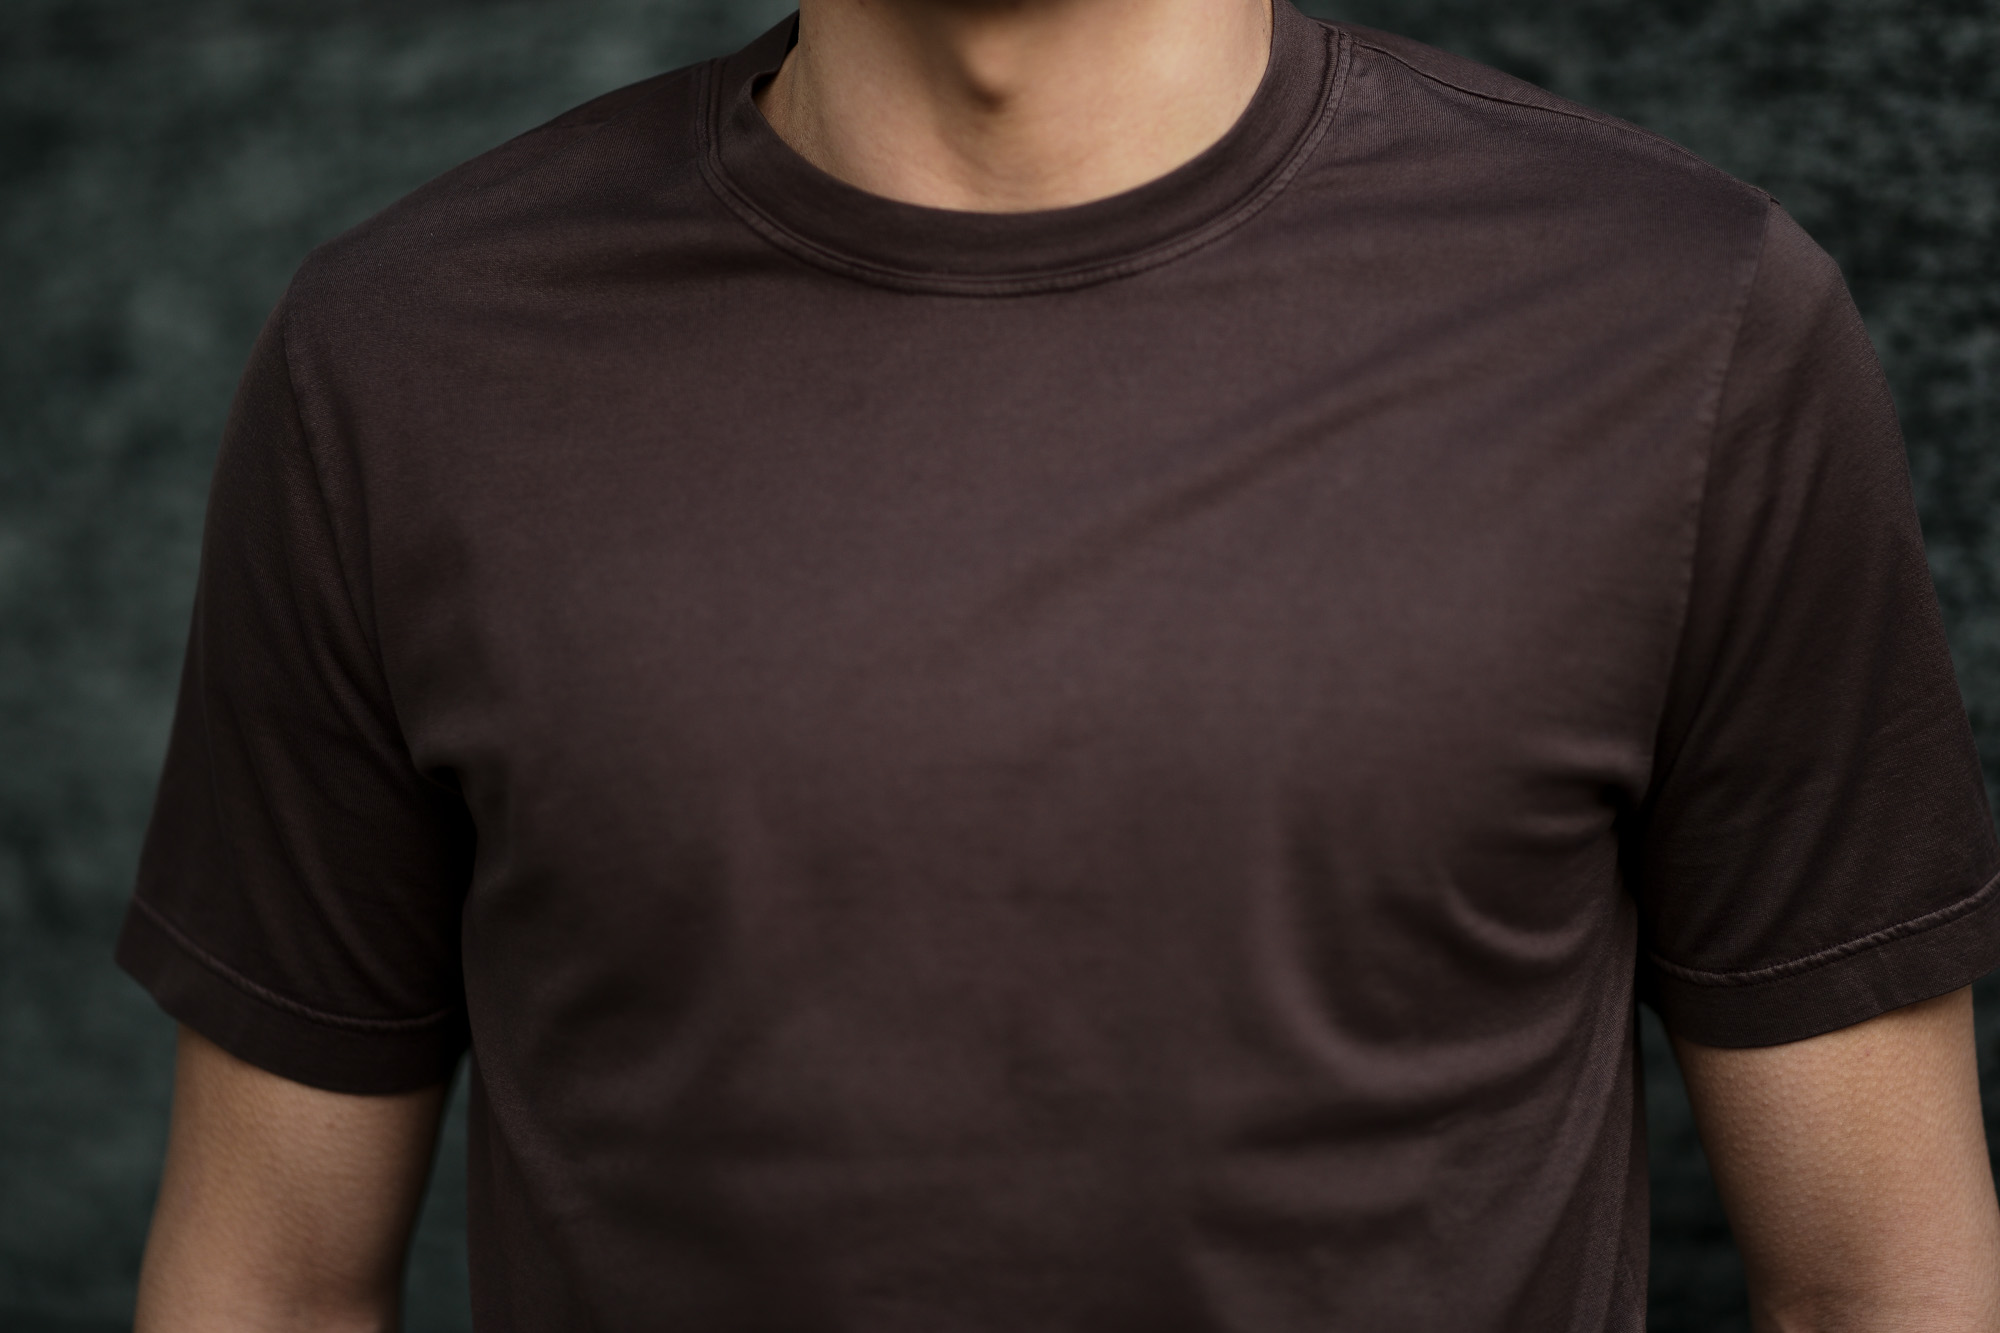 FEDELI(フェデーリ) Crew Neck T-shirt (クルーネック Tシャツ) ギザコットン Tシャツ BROWN (ブラウン・811) made in italy (イタリア製) 2020 春夏新作 愛知 名古屋 altoediritto アルトエデリット TEE